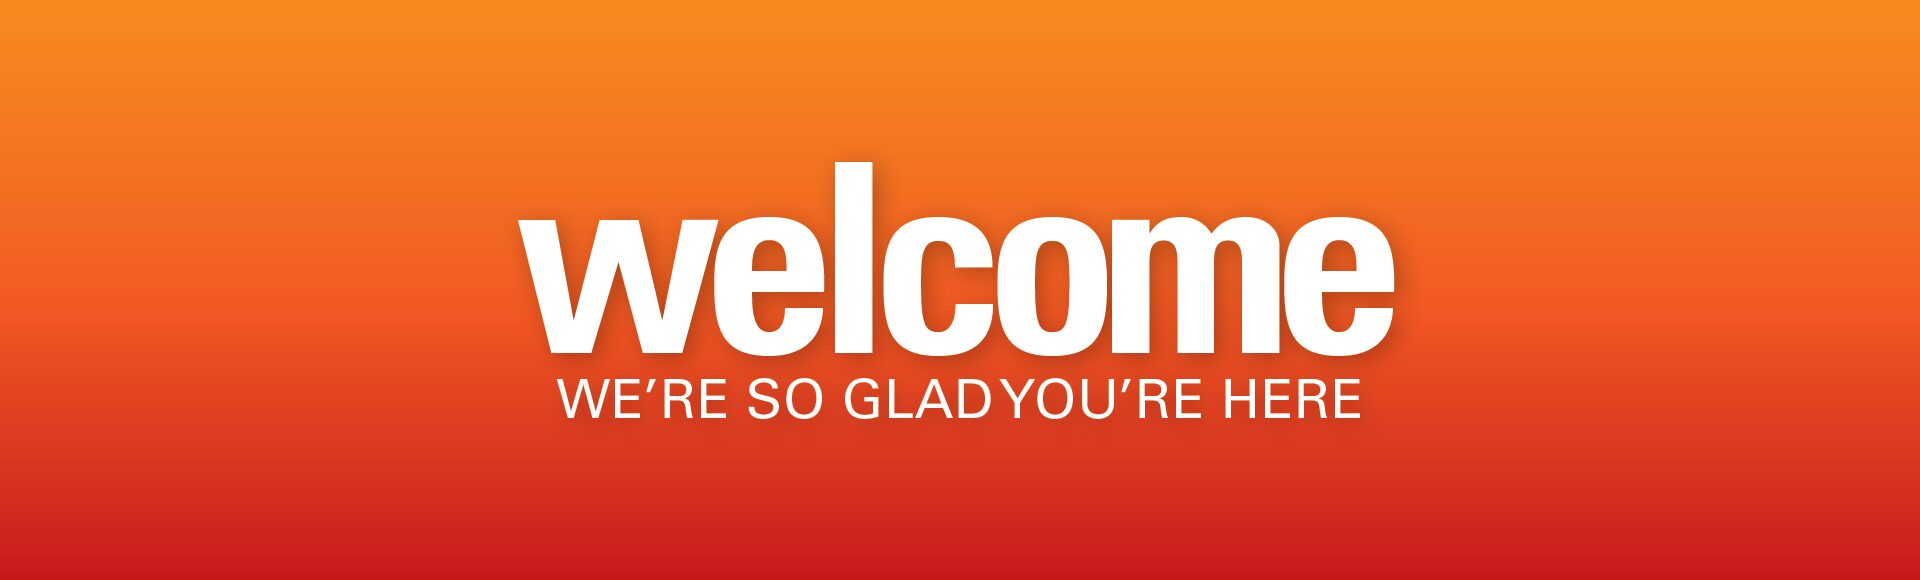 White text on an orange background reads, "Welcome. We're so glad you're here."